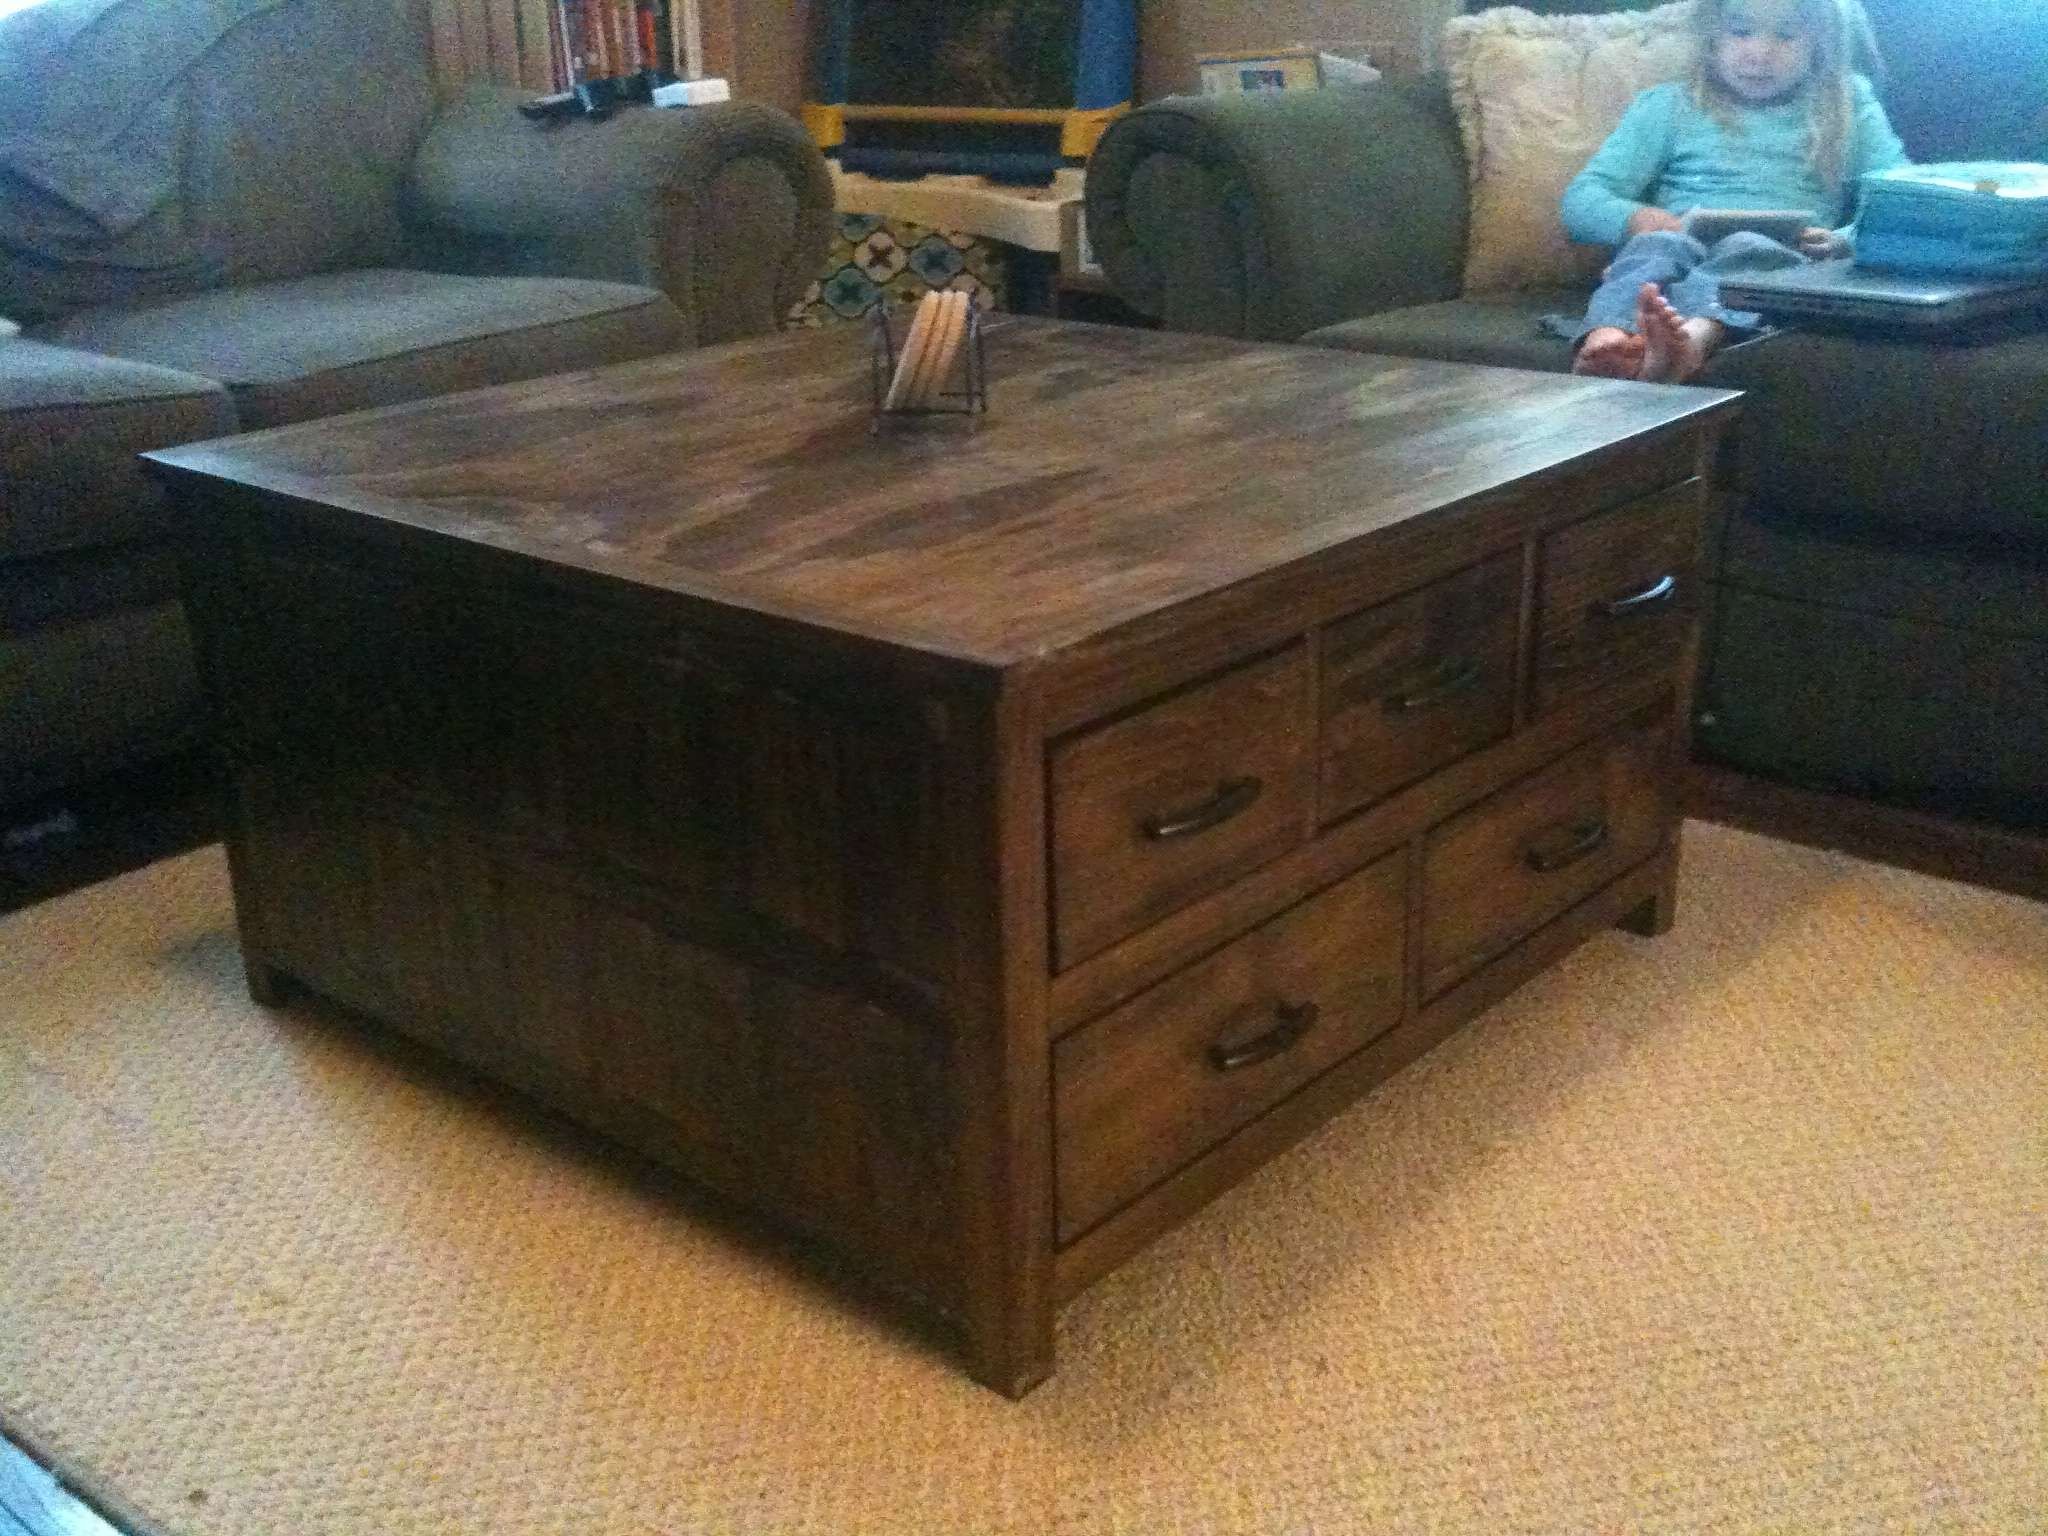 Unique Trunk Coffe Table Square Trunk Coffee Table Square Coffee Pertaining To Current Square Chest Coffee Tables (Gallery 3 of 20)